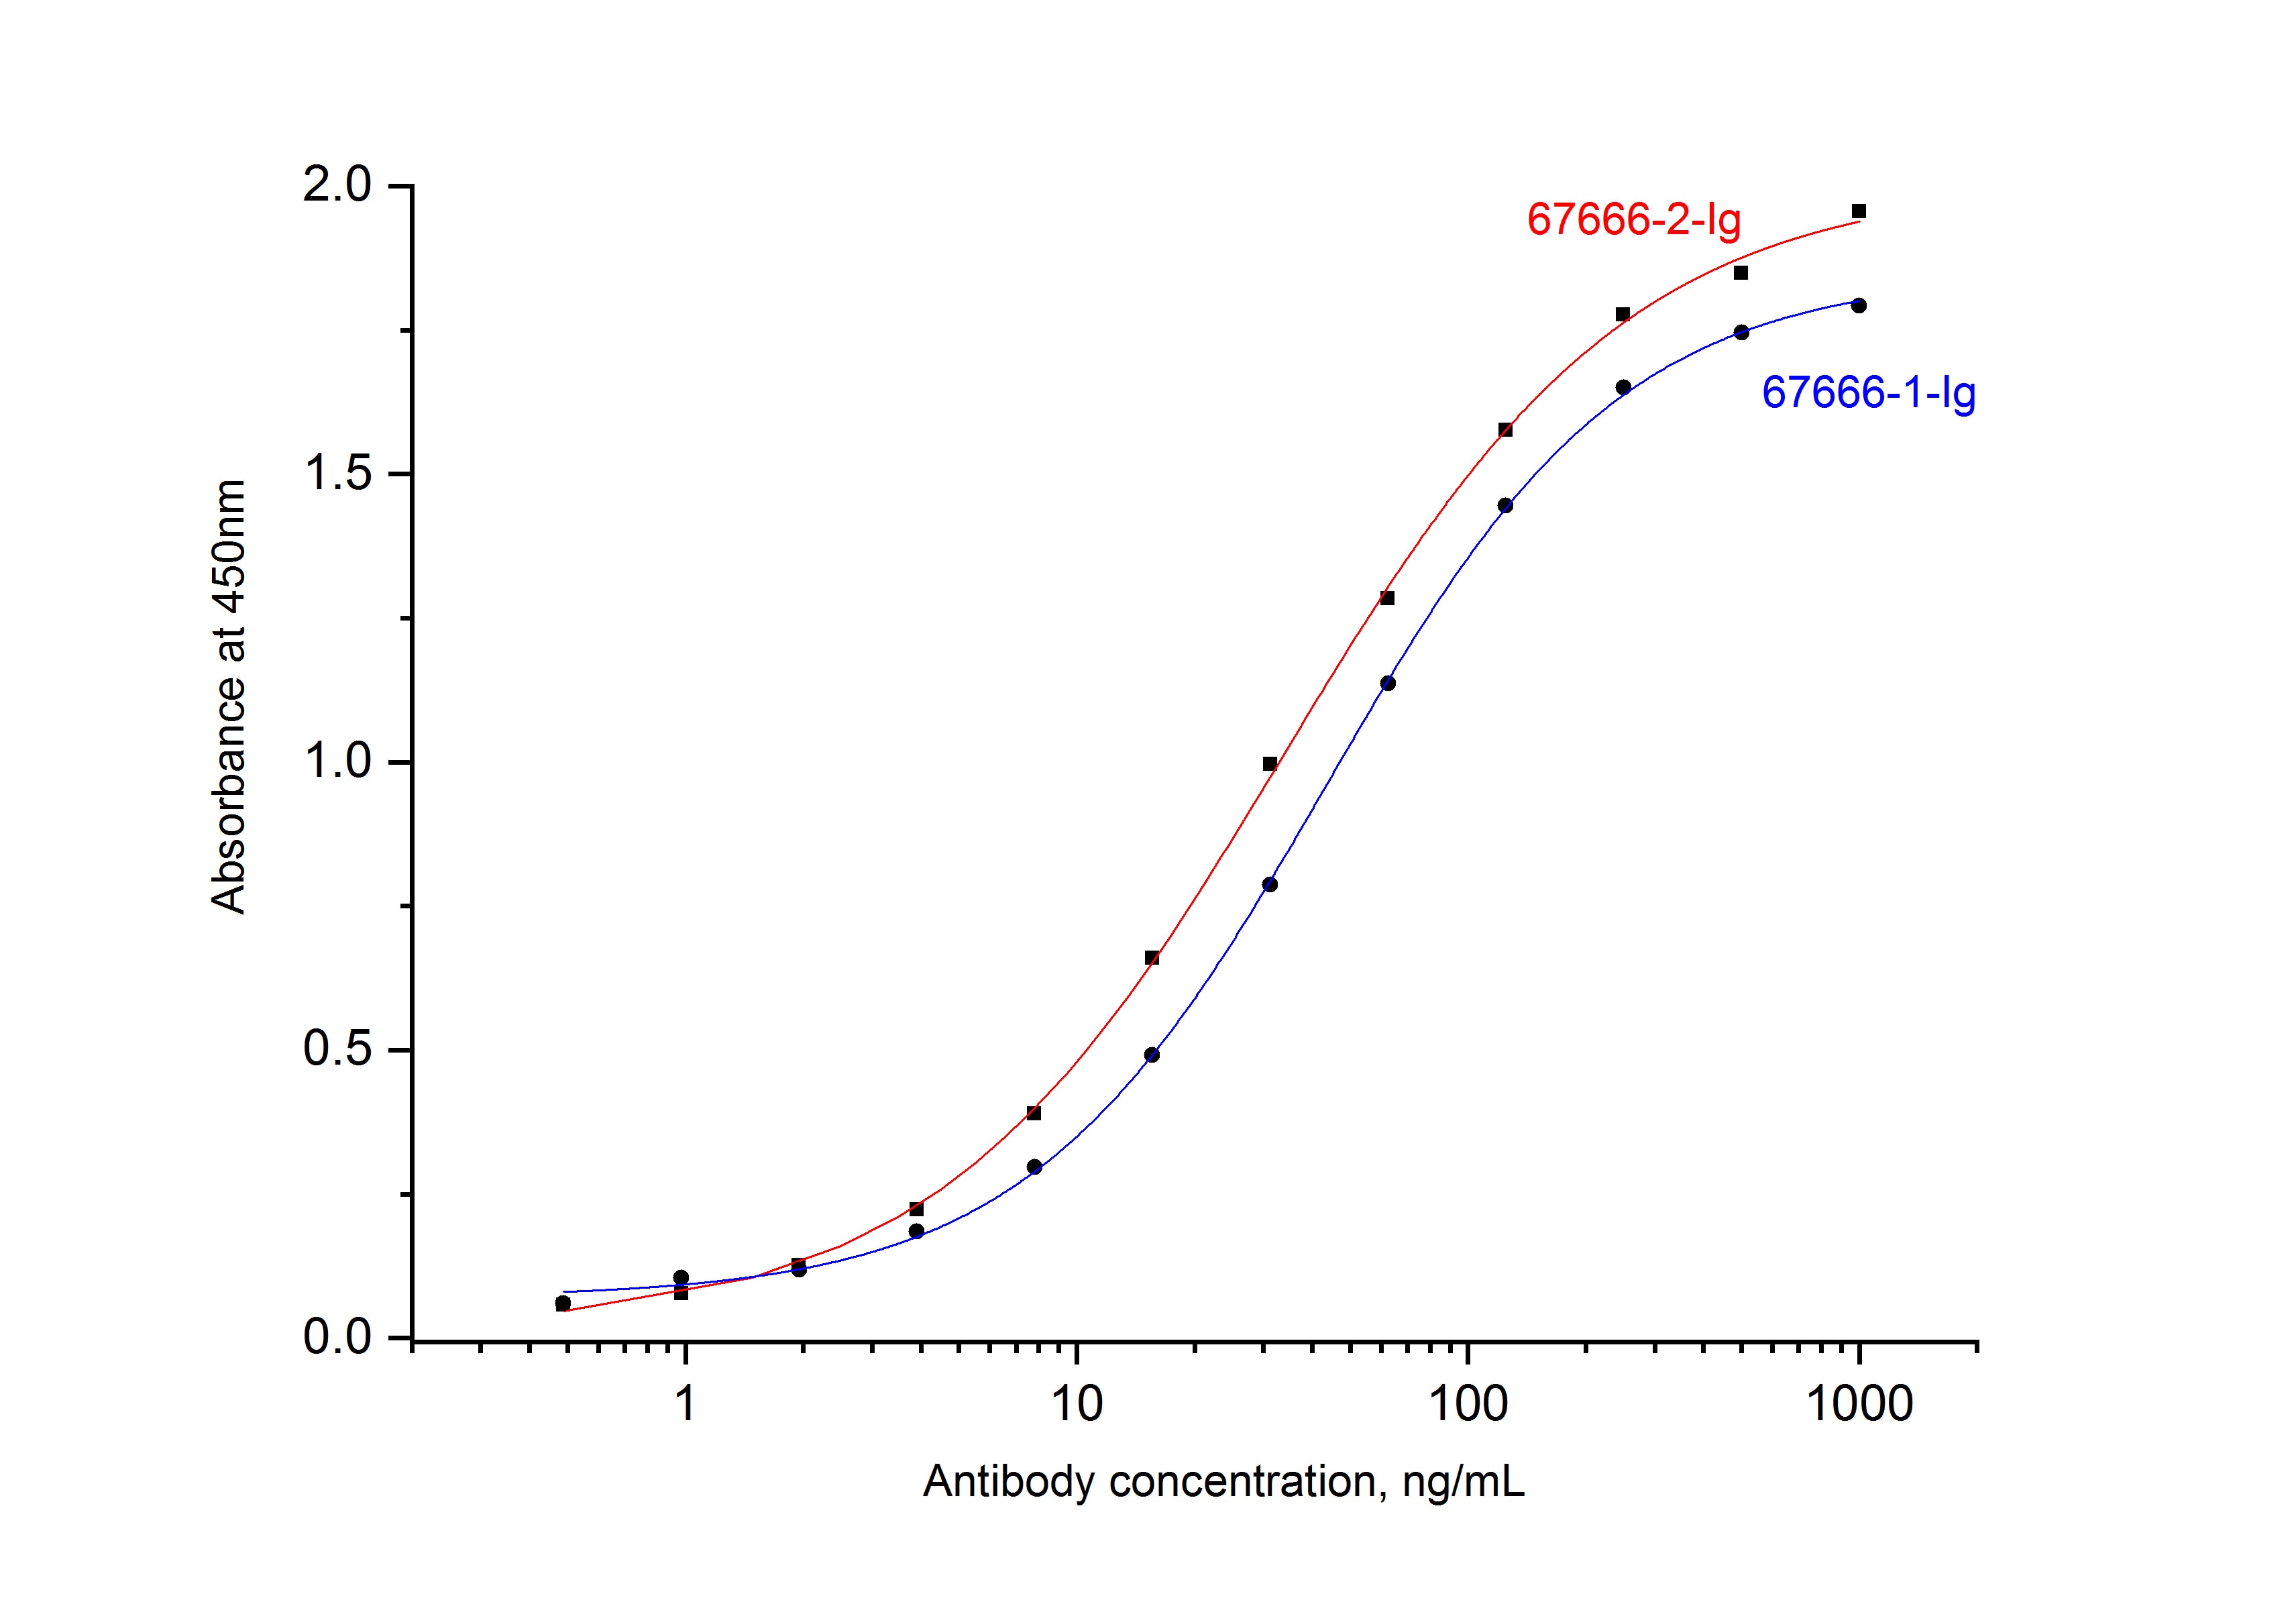 ELISA experiment of Recombinant protein using SARS-CoV-2 Nucleocapsid Phosphoprotein Monoclonal  (67666-2-Ig)